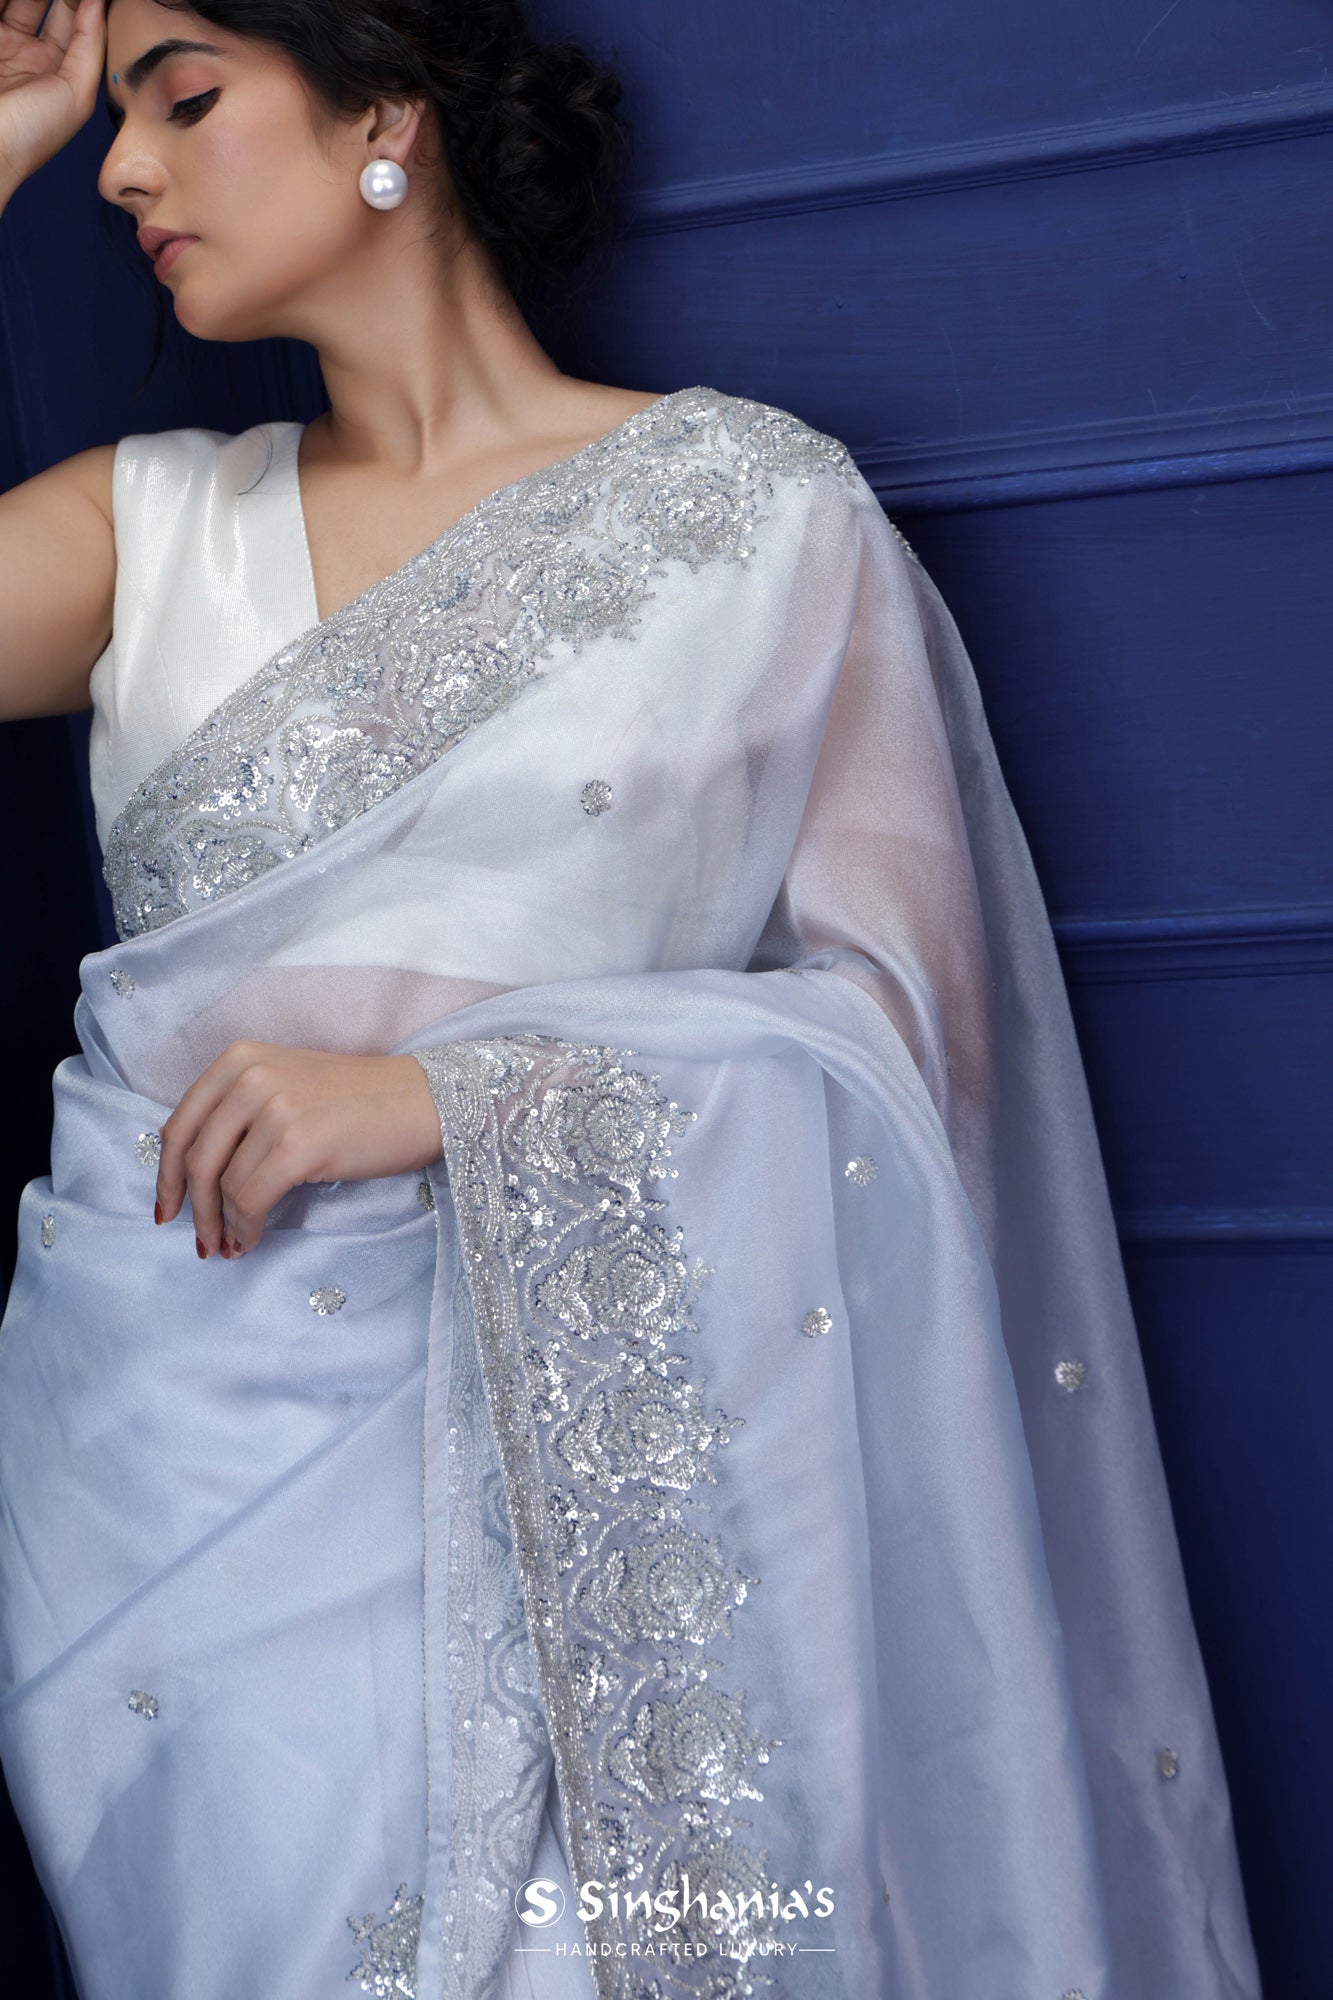 Icy Blue Tissue Saree With Hand Embroidery